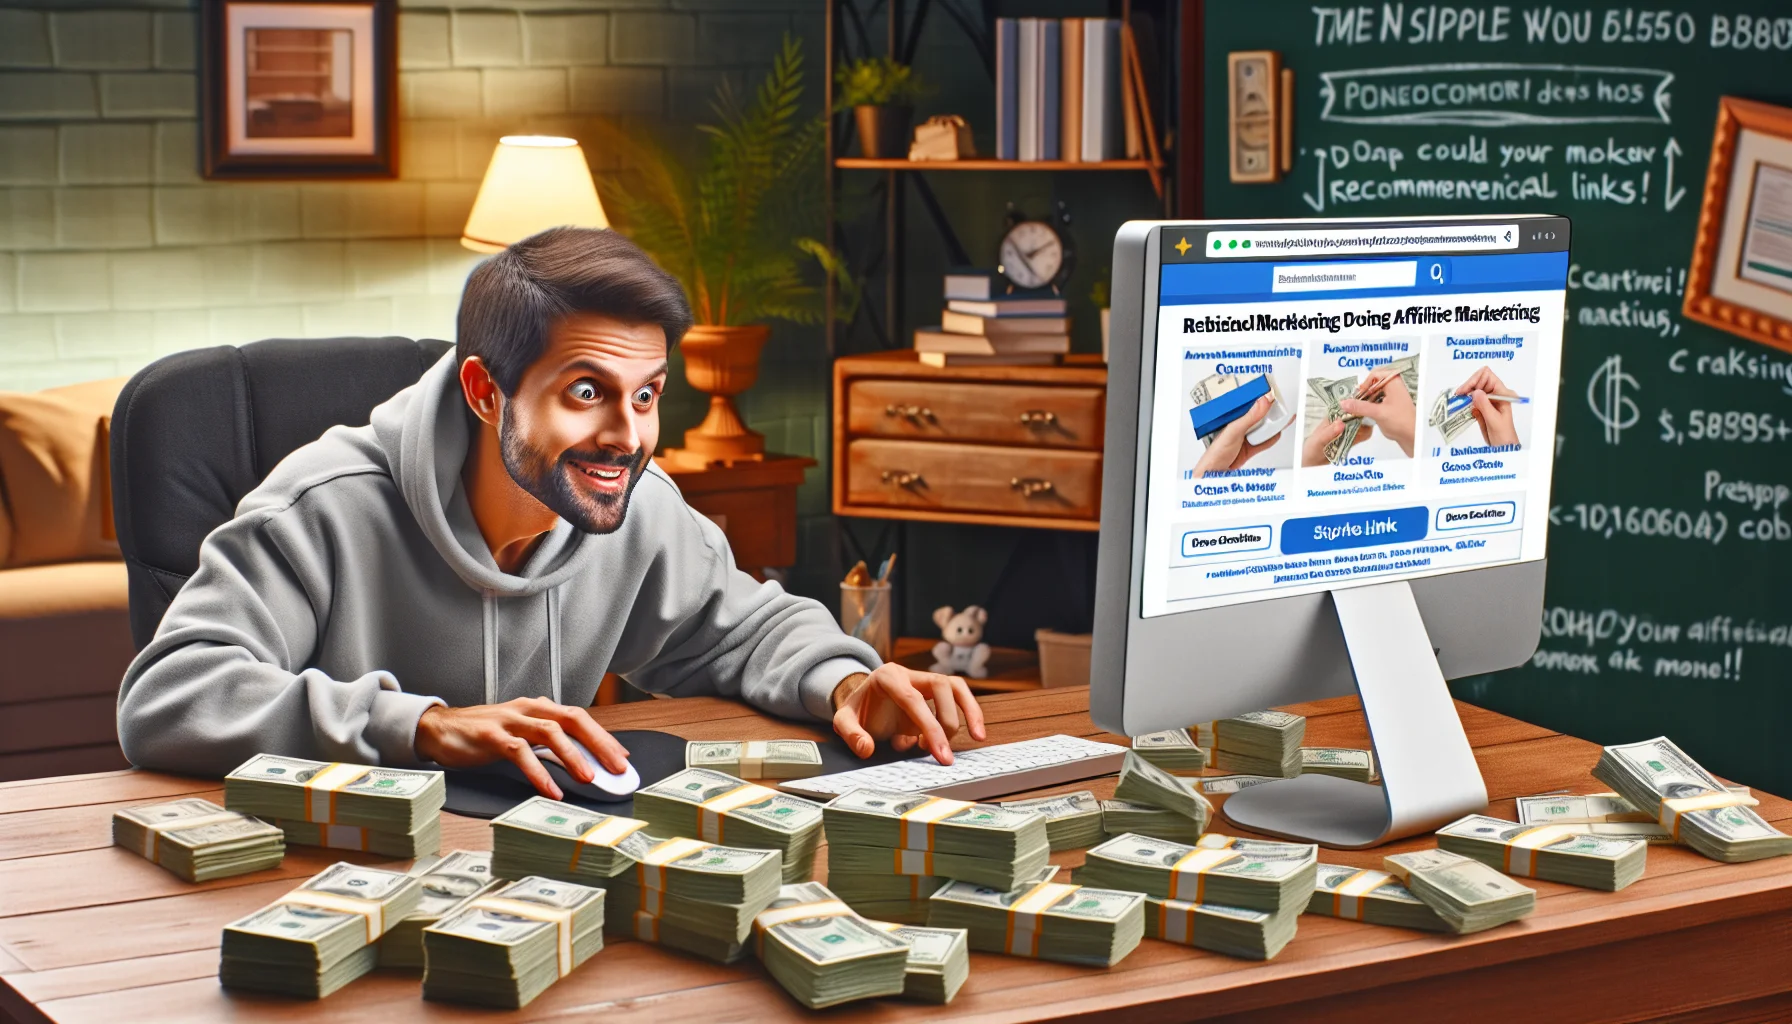 Create a humorous, realistic interpretation of a person doing affiliate marketing. Depict this in an enticing scenario related to earning money online. Perhaps, show a Caucasian man sitting at a computer desk filled with stacks of dollar bills in a cozy home office, while clicking a mouse and his other hand is on 'recommendation links'. On the computer screen, show a website that's showcasing probable products to promote. Make sure to capture the excitement and anticipation in the man's facial expression, as if the next click could strike gold.